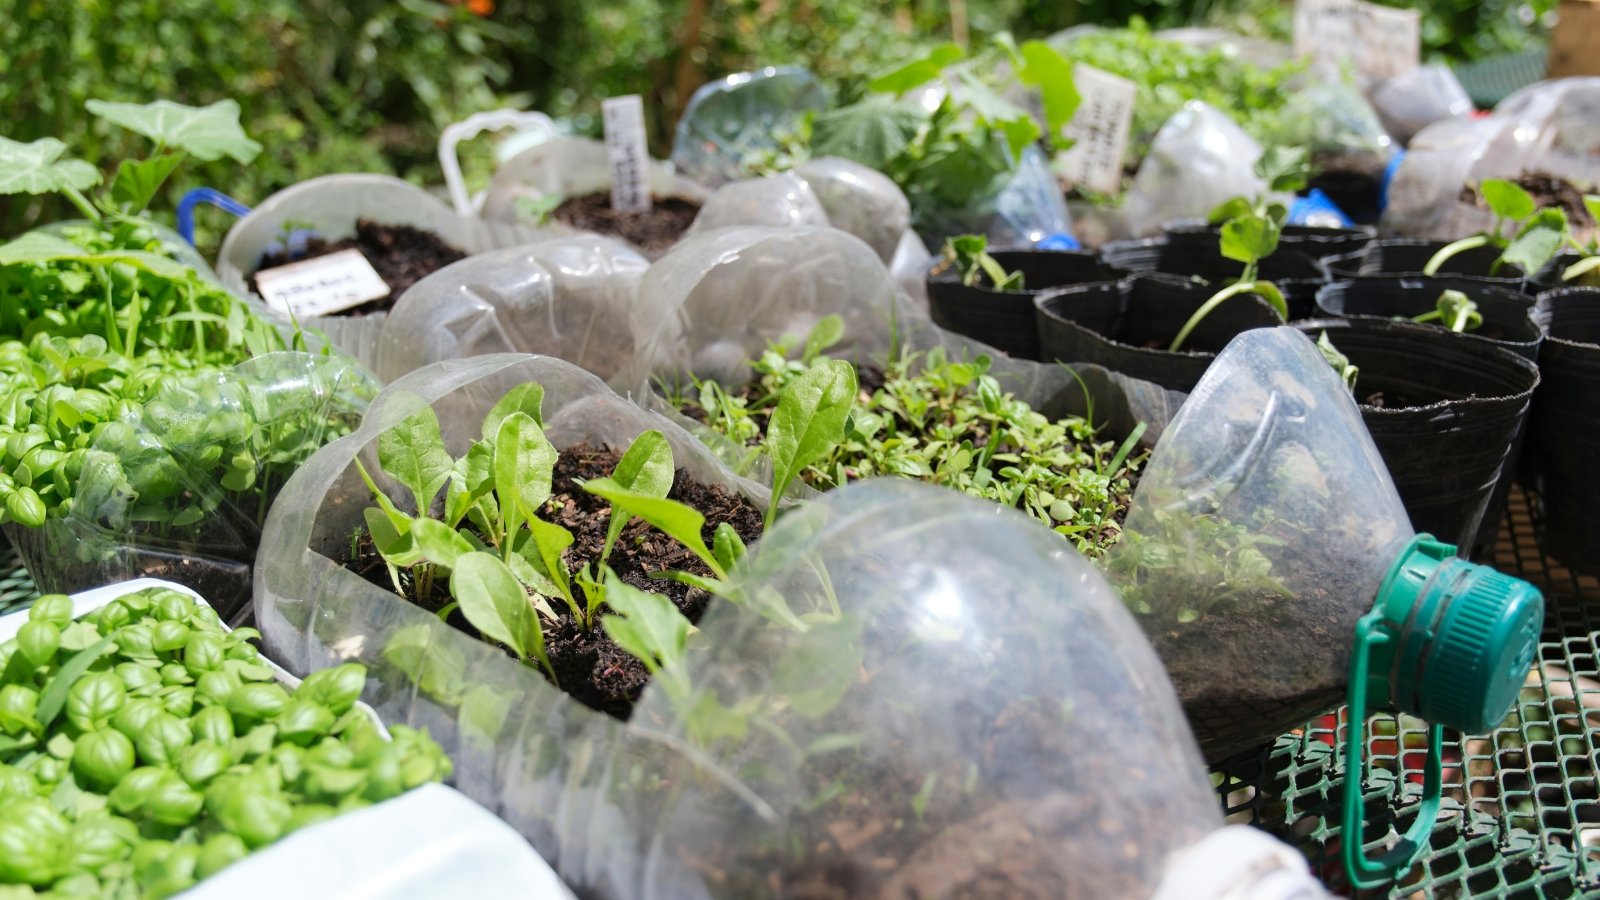 Leafy vegetable seedlings thrive in clear plastic bottles used as pots, basking under the sun's nourishing rays, growing steadily in their makeshift homes.